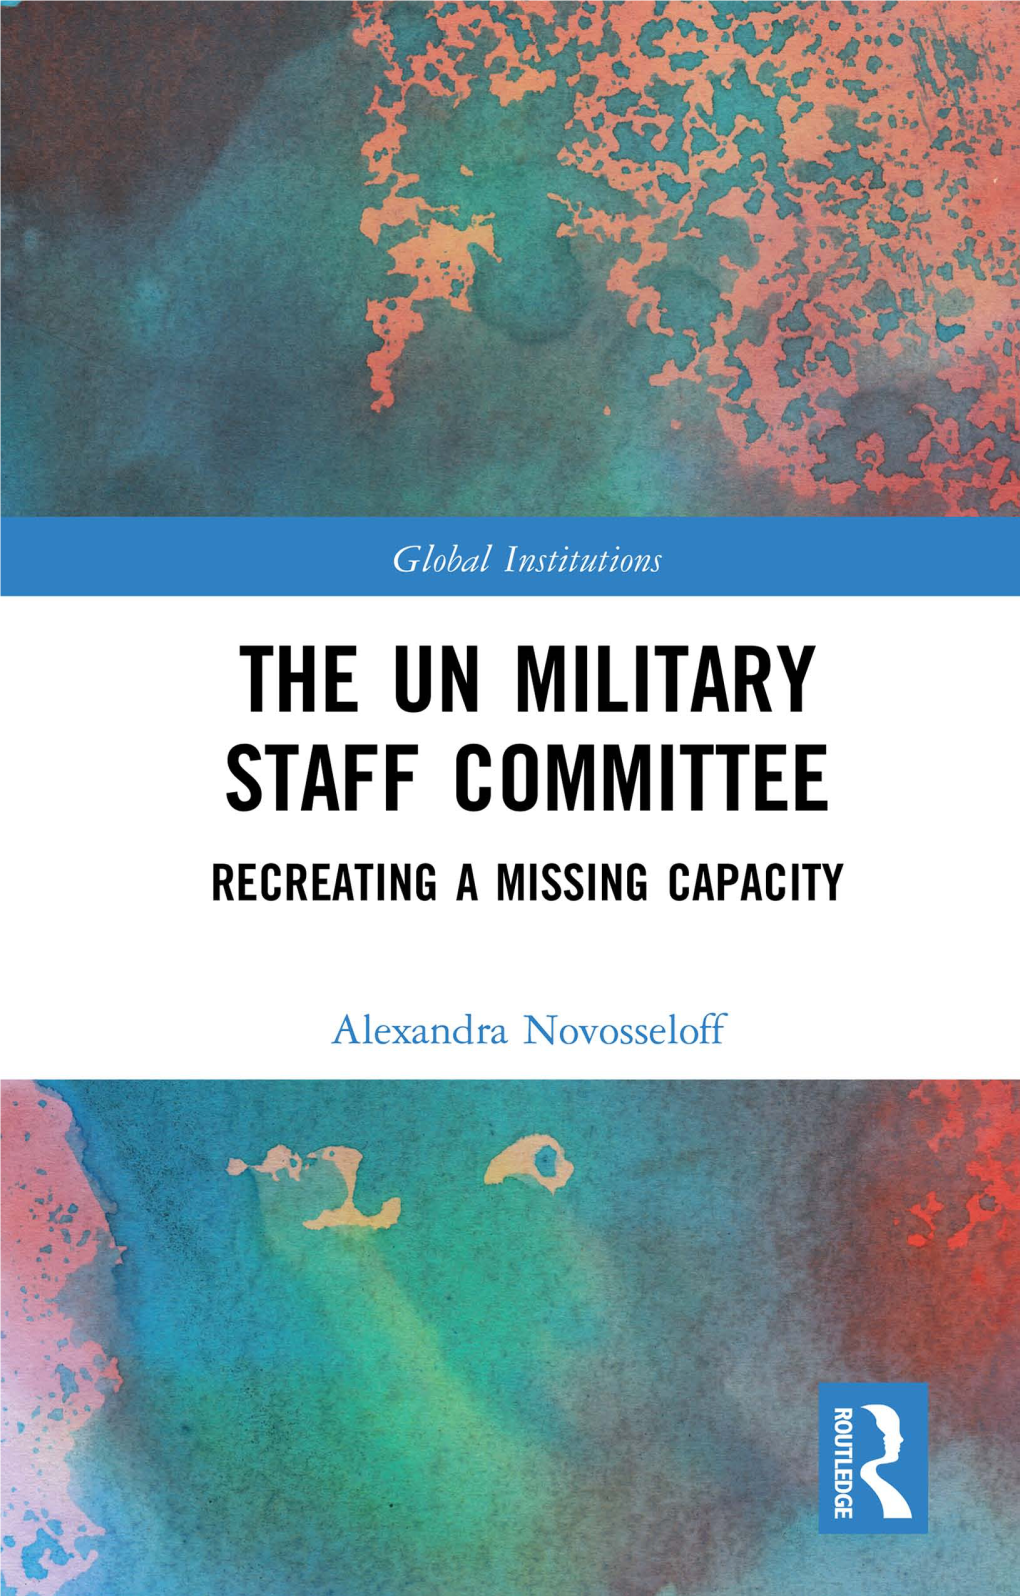 The UN Military Staff Committee?Â€ Occasional Paper Series, No.19, (Los Angeles: California State University, 1990), 31 Pages